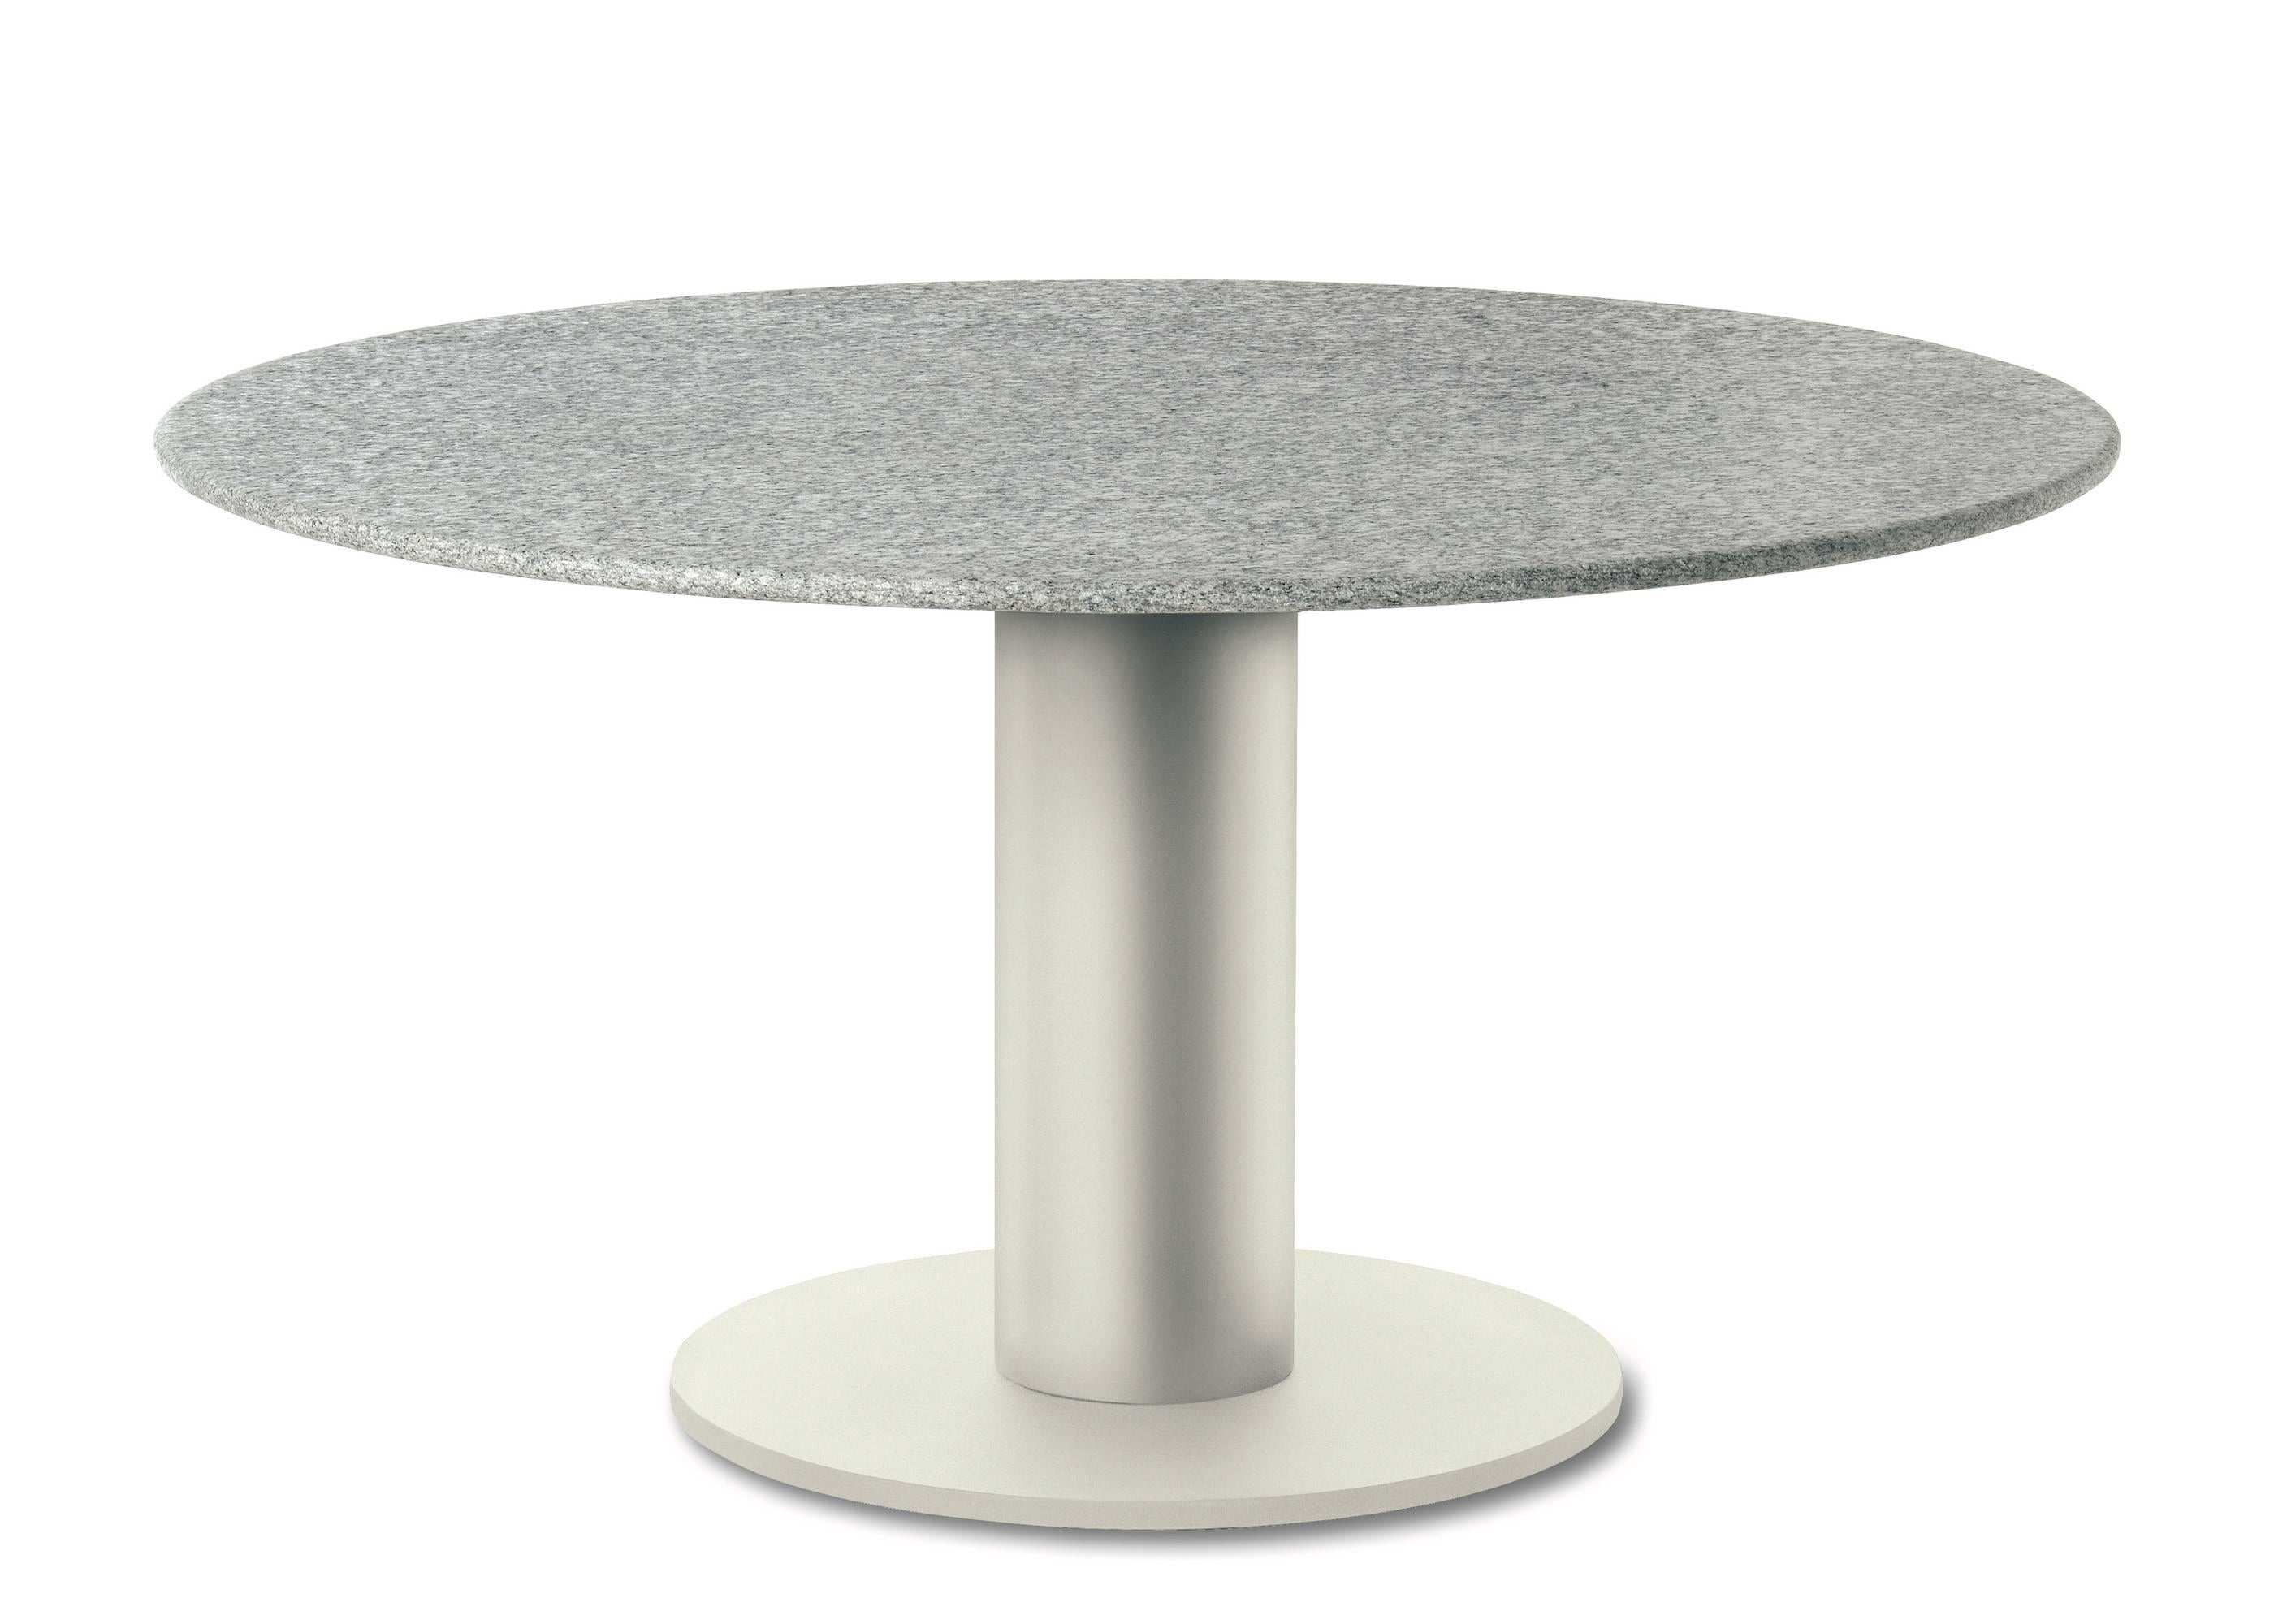 The sculptural form of the Platter table by Roda is expression of timeless beauty, in which a lacquered metal pedestal plunged into the ground and the slender stone top outlines against the sky. A perfect mix of simple but defined lines with a